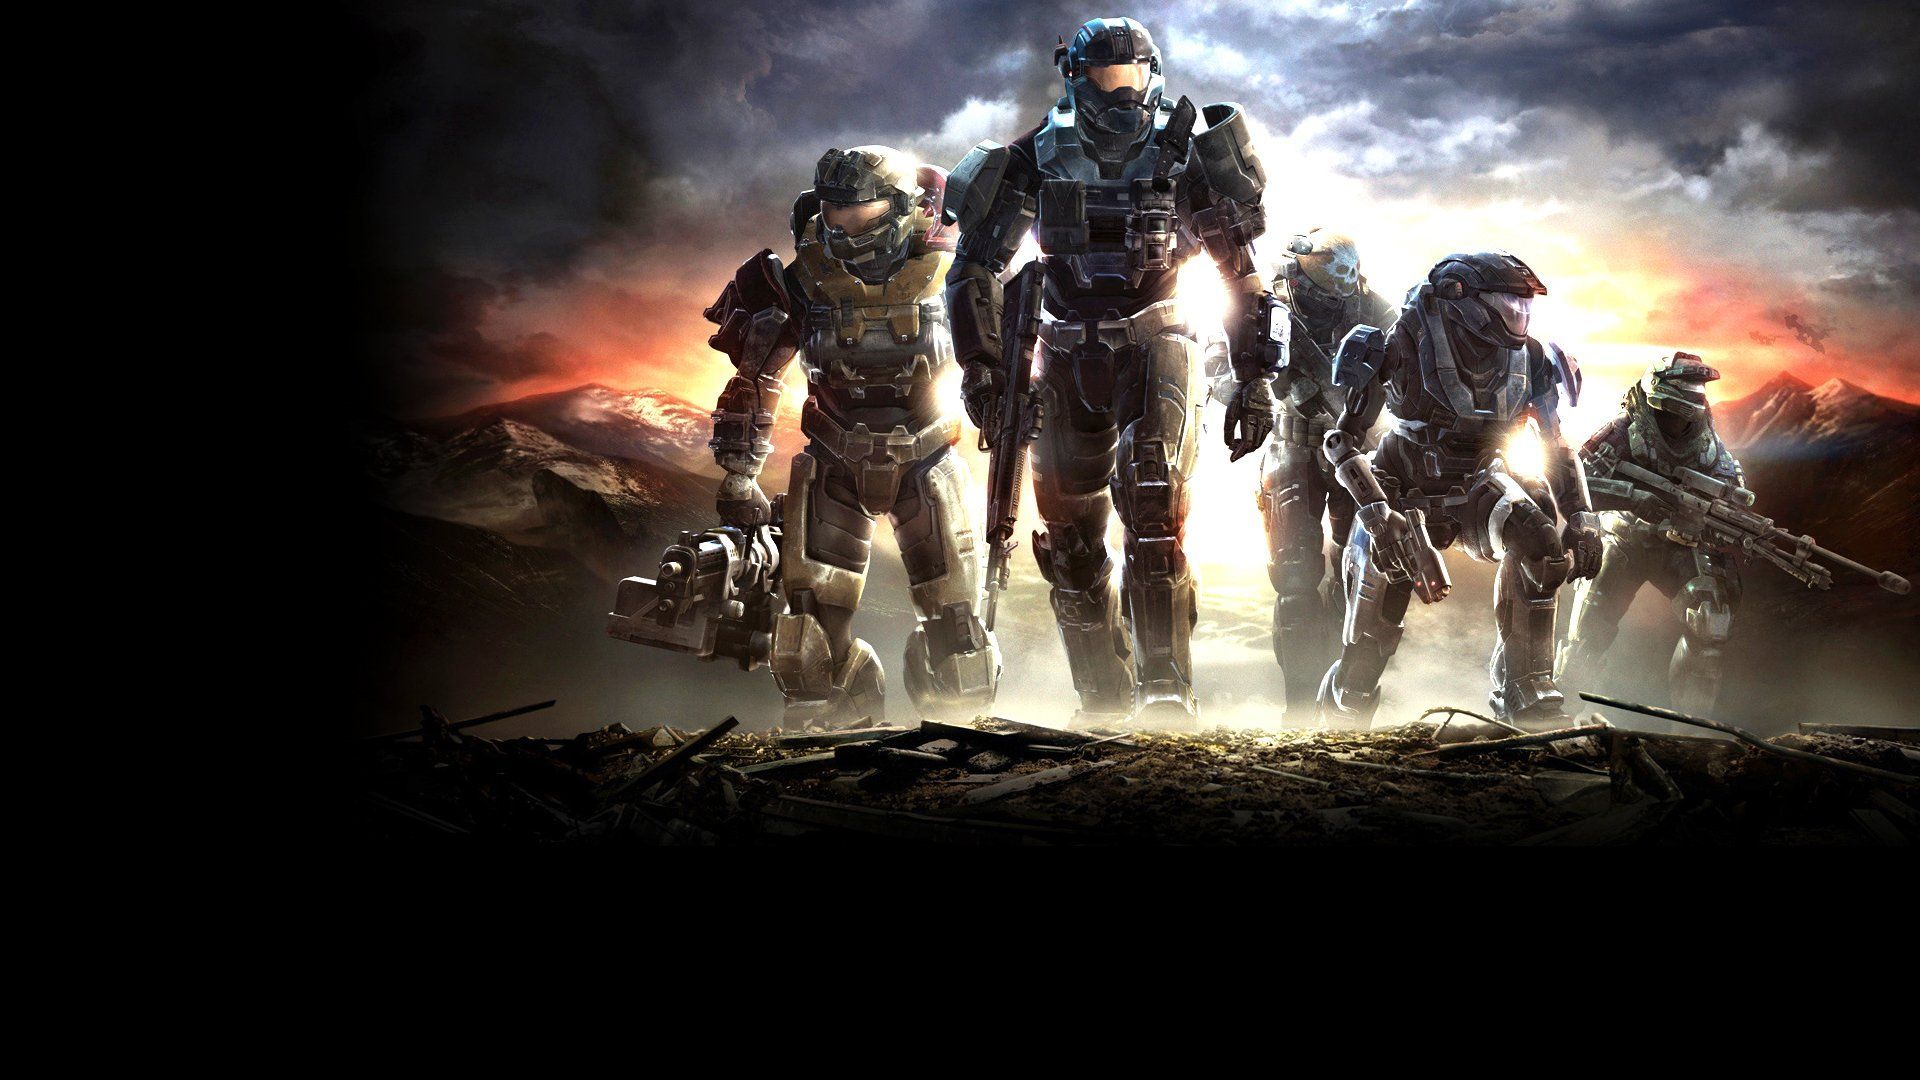 Download HD Halo Wallpapers For Desktop Background Free HD